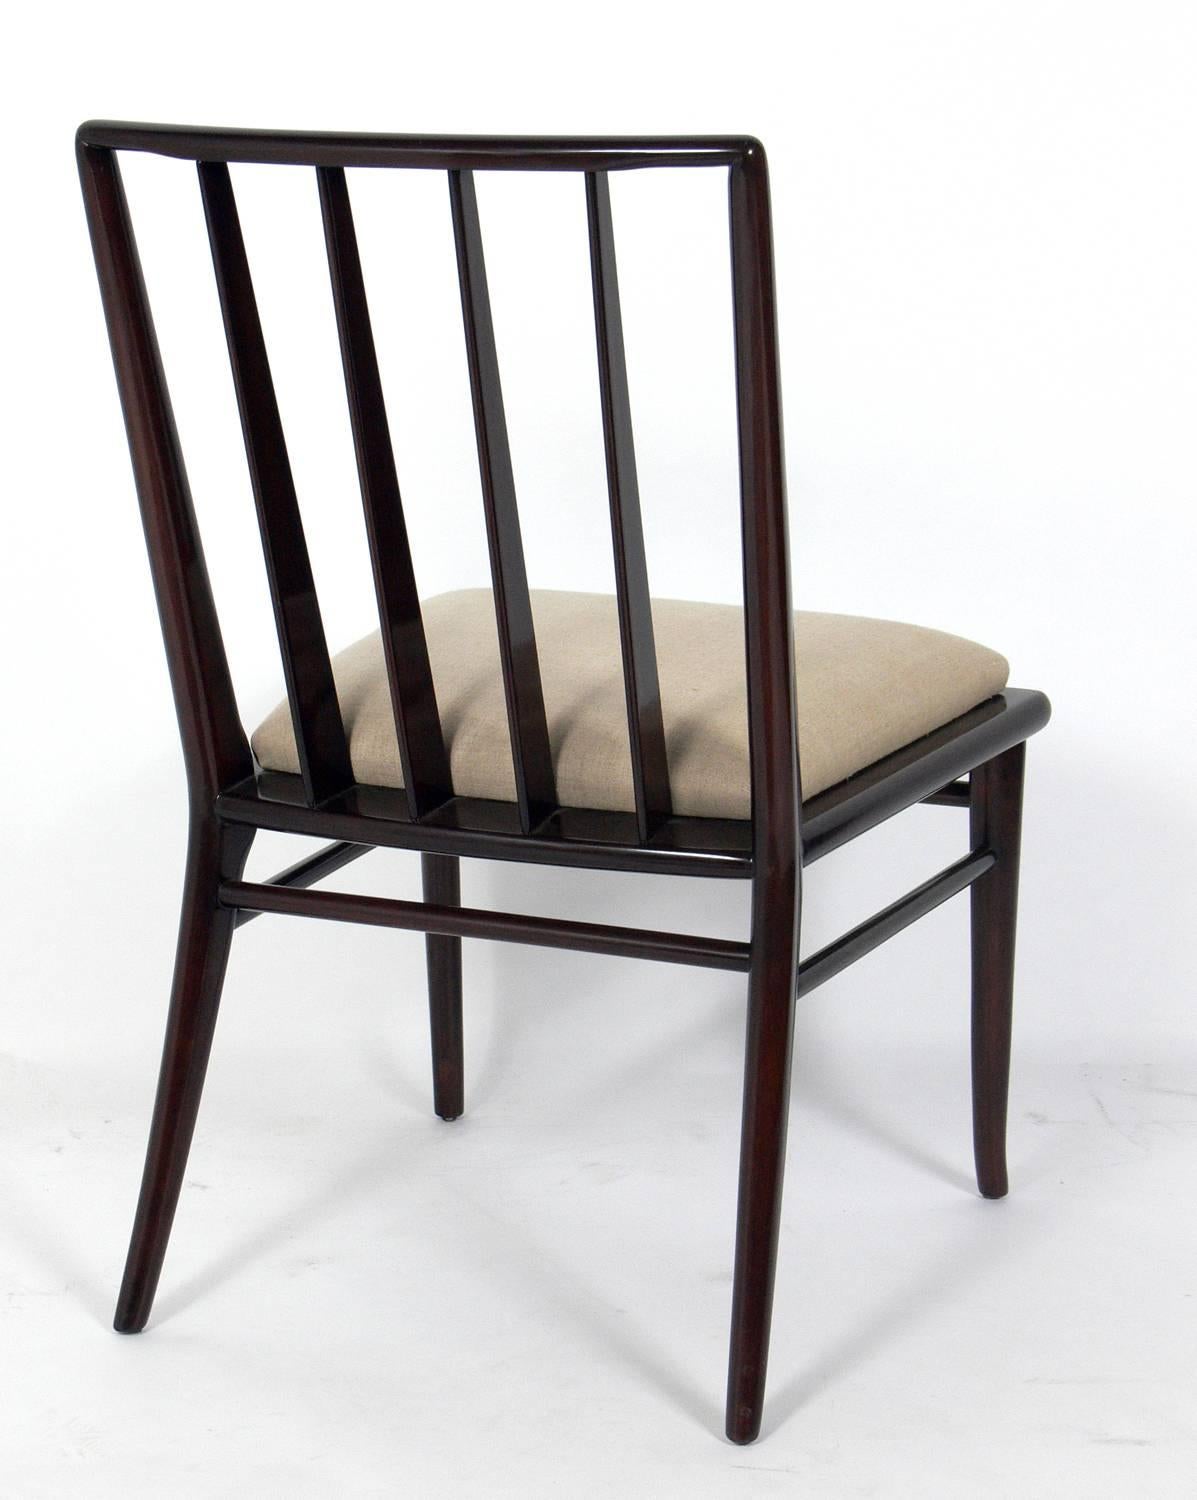 American Set of Four Dining Chairs by T.H. Robsjohn-Gibbings